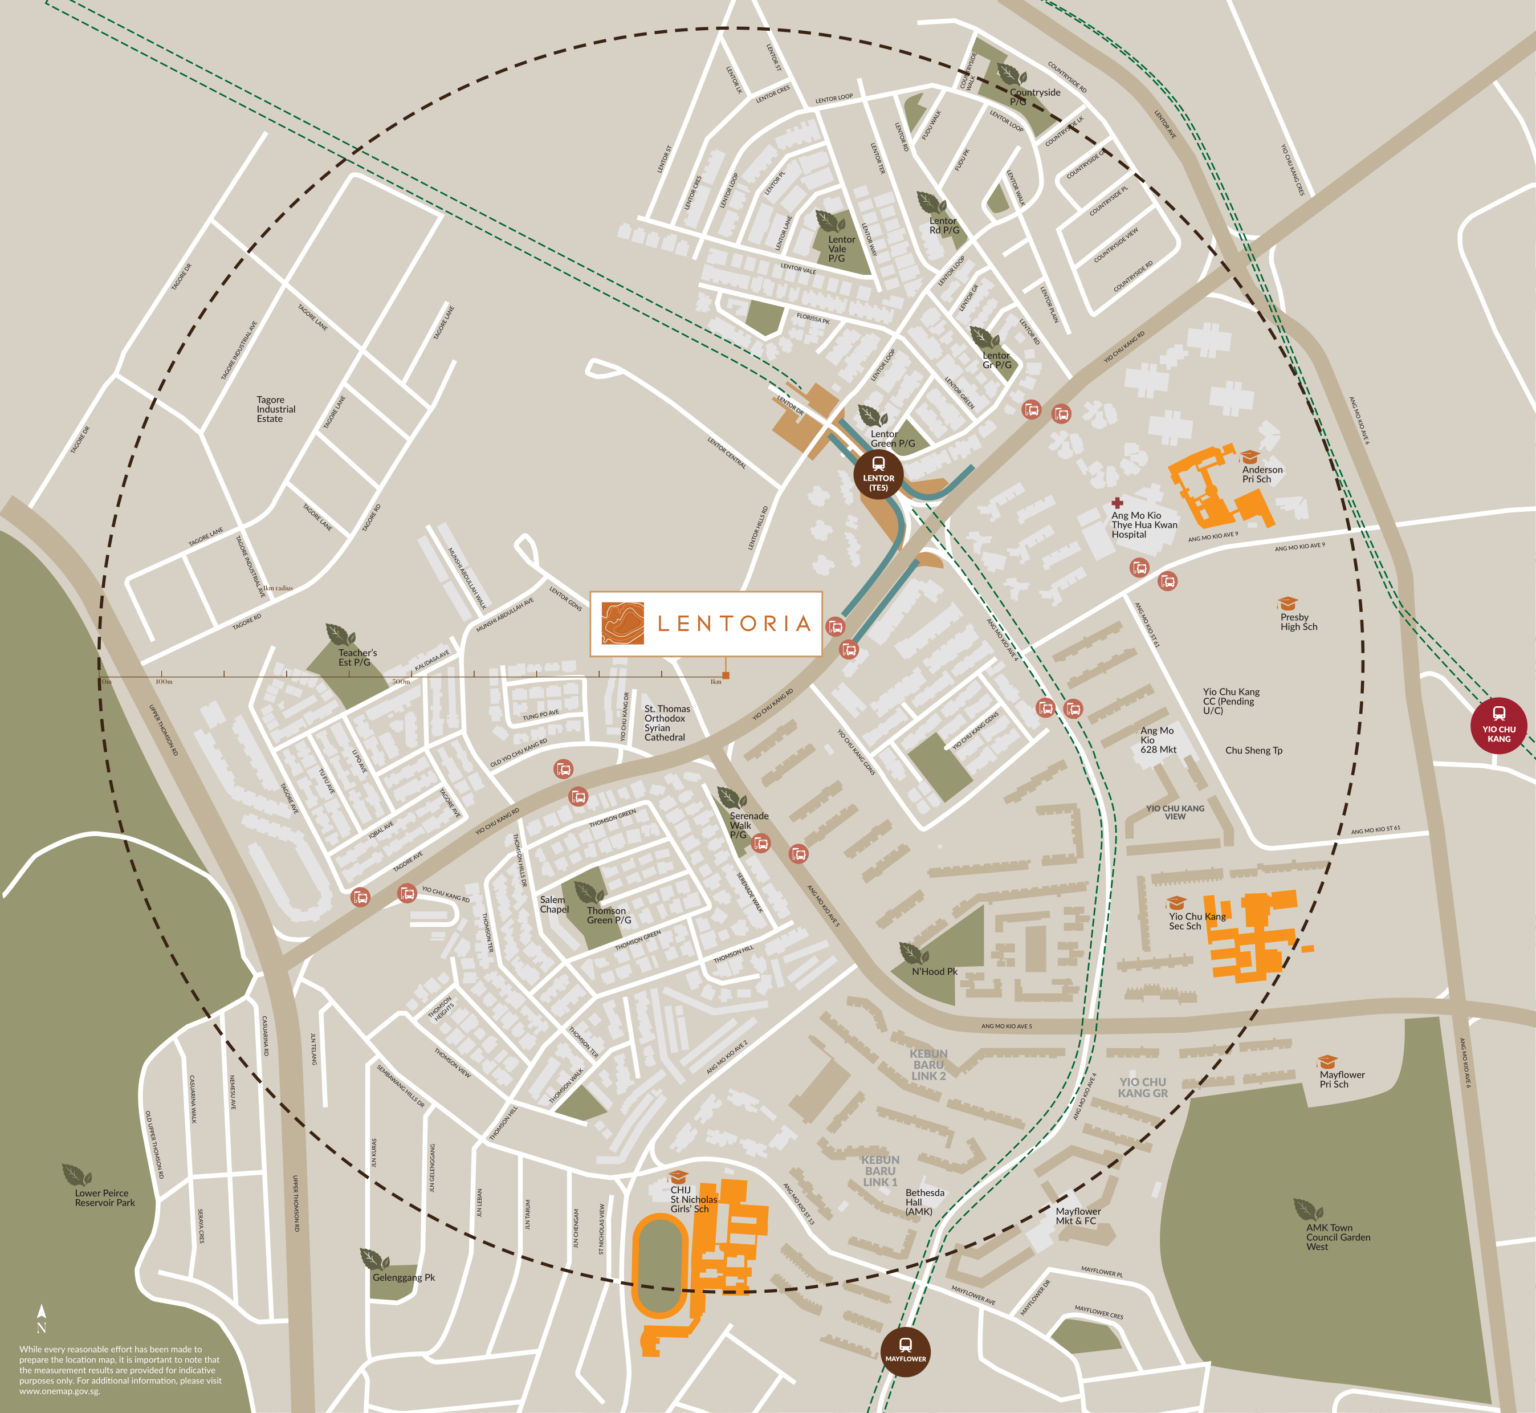 Map Showing Amenities in Lentor within 1 kilometer of Lentoria